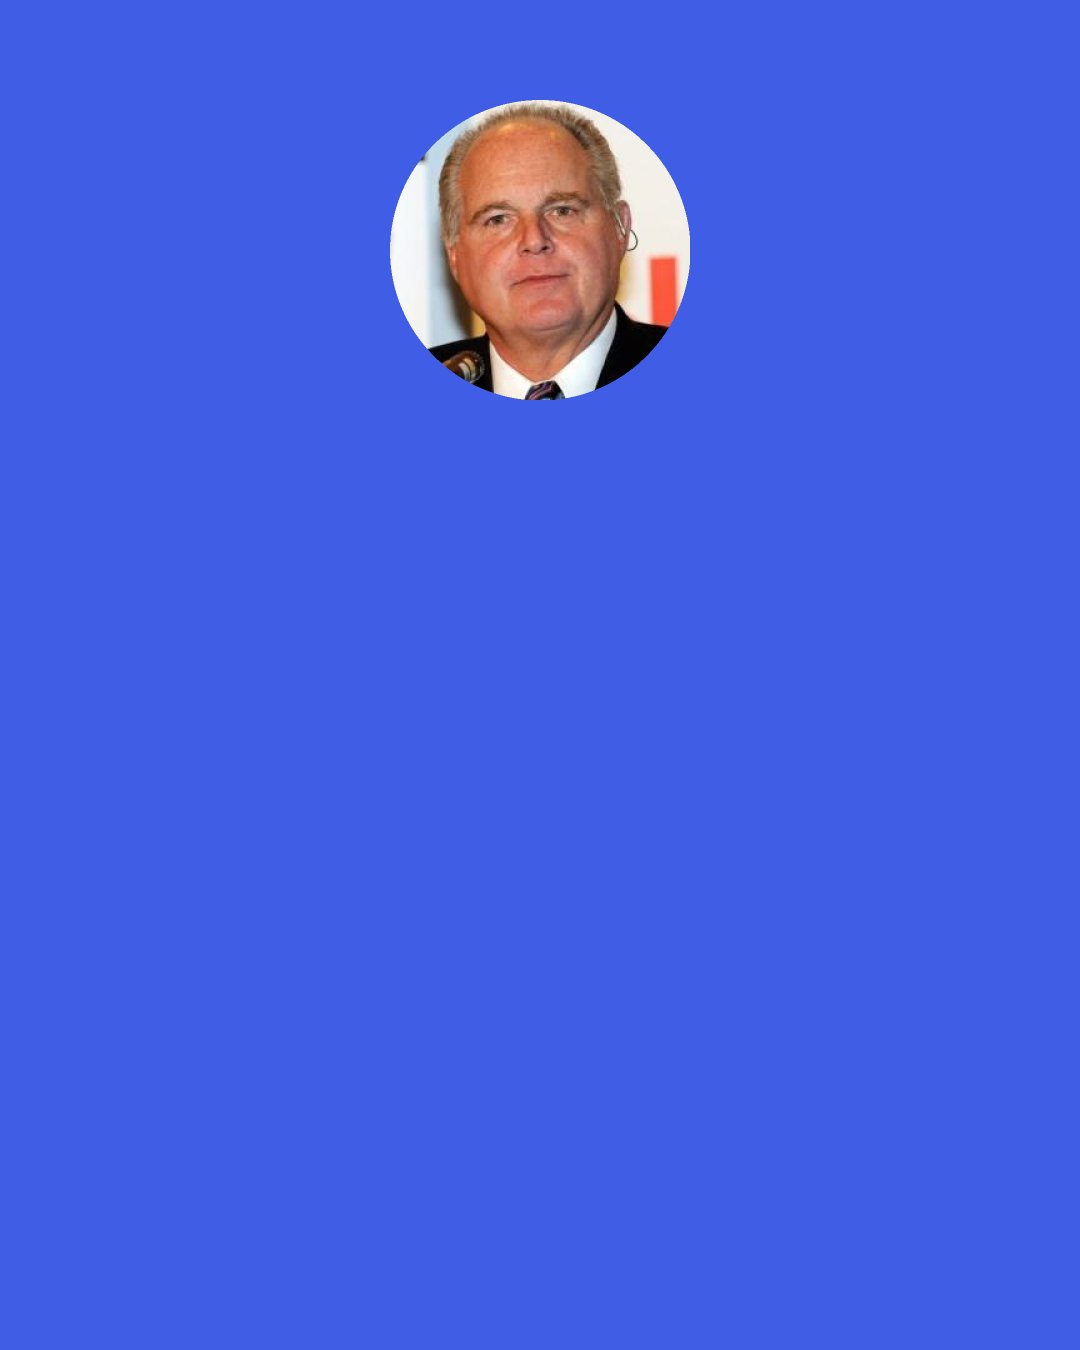 Rush Limbaugh: This is a guy [Steven Lerner] who believes, for example, that Reaganomics or trickle-down economics means, "The rich got rich by stealing from the poor," or stealing from the middle class and making them poor via debt. He has worked with unions in Europe.